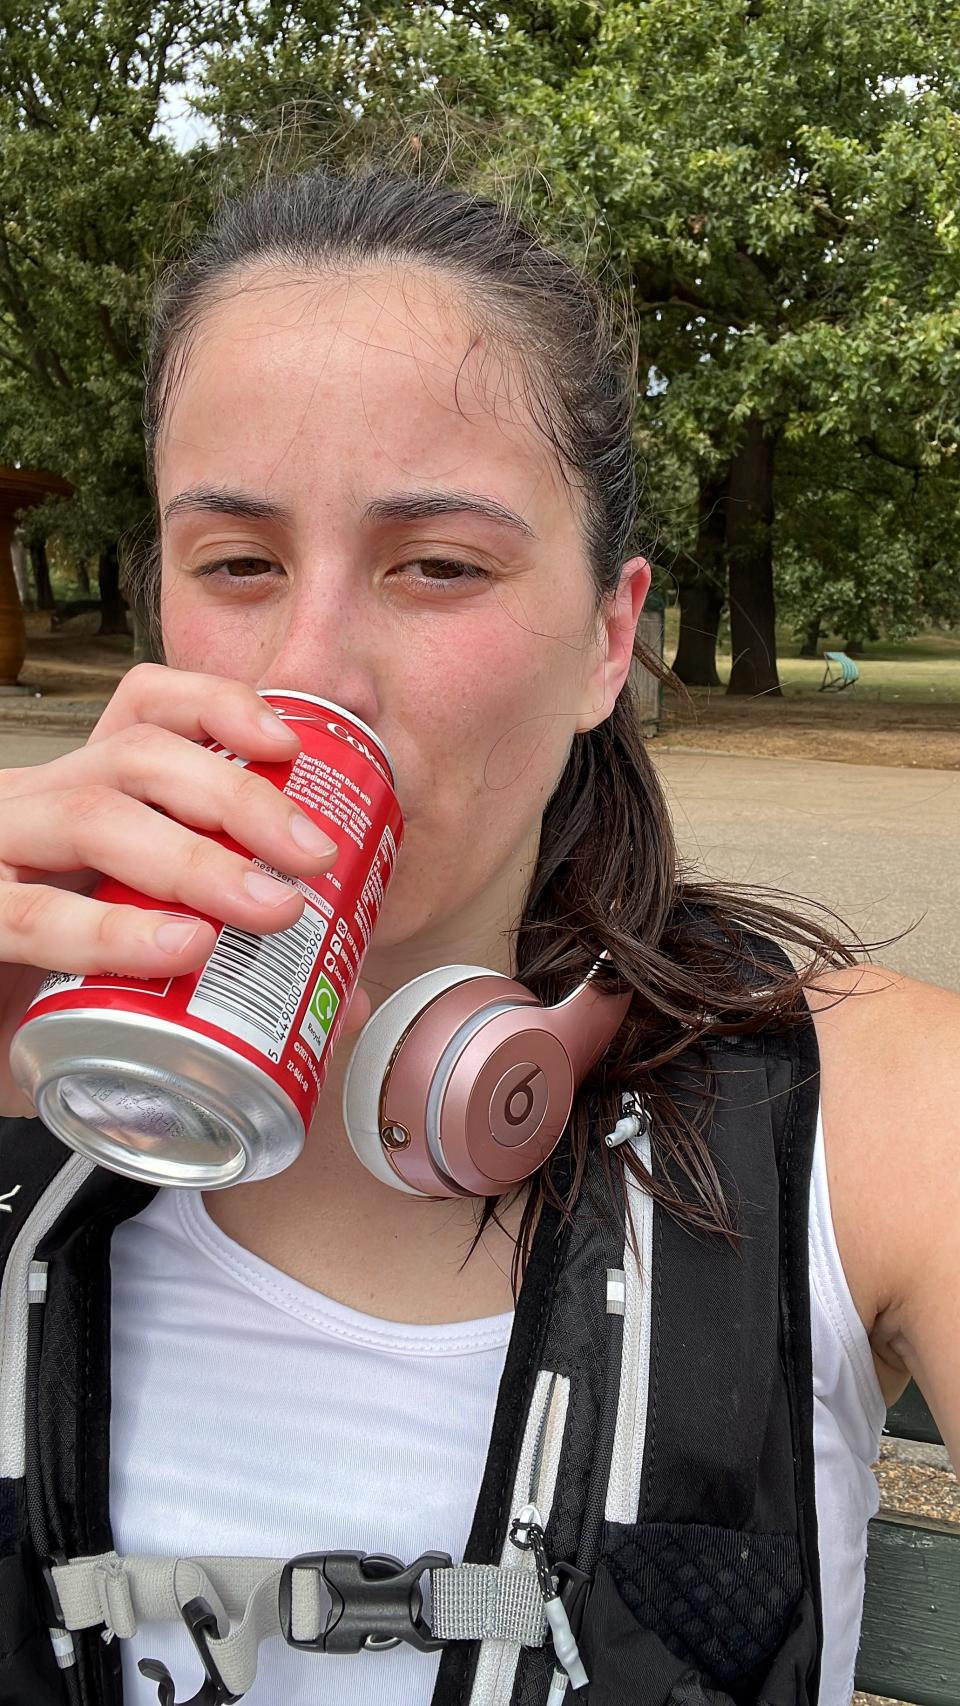 The author sipping on a Coca Cola after completing an 18km run.